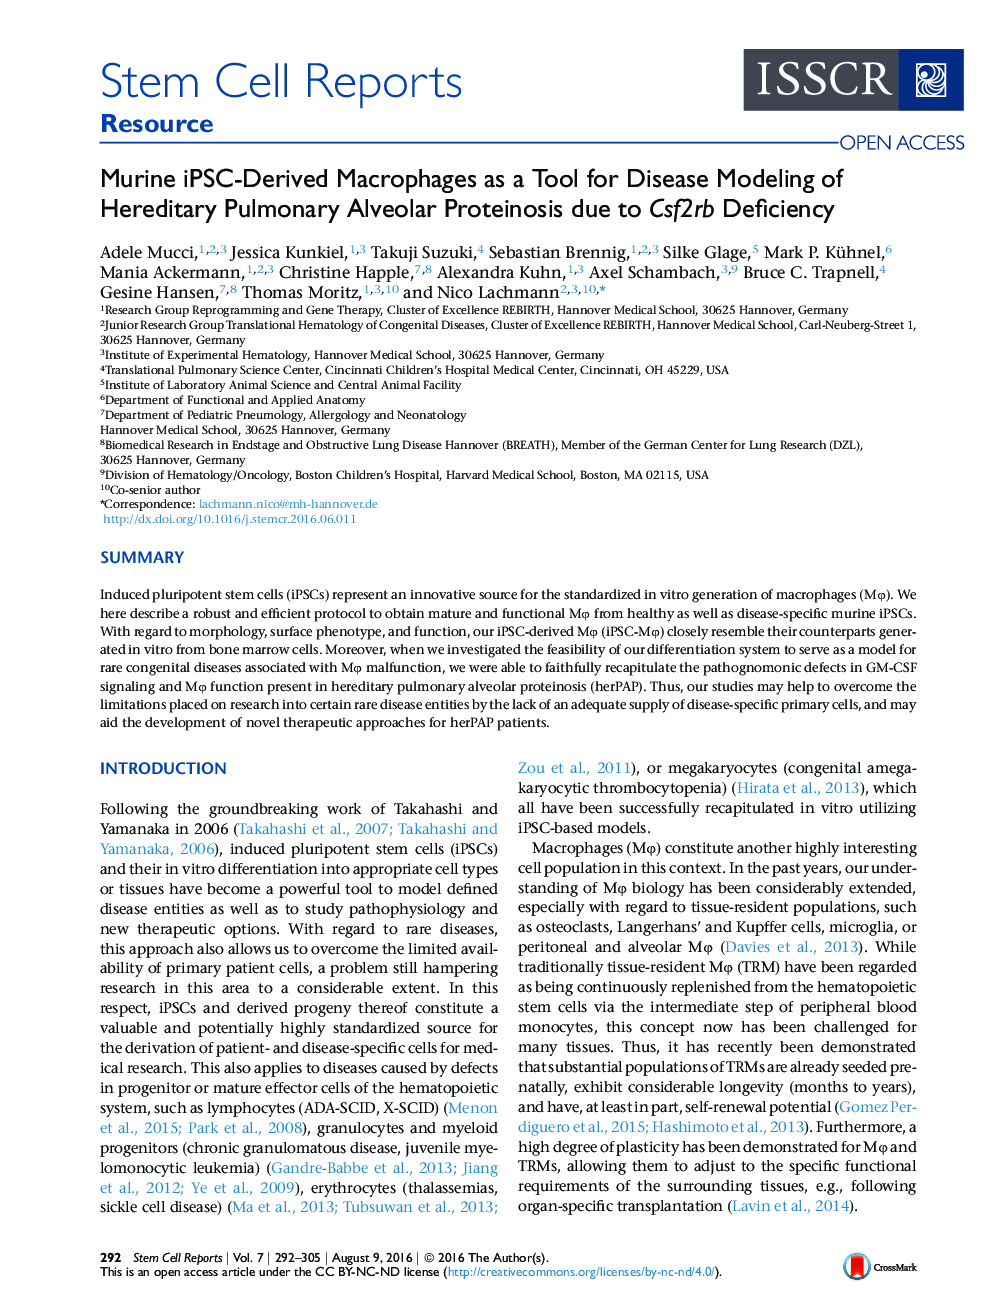 Murine iPSC-Derived Macrophages as a Tool for Disease Modeling of Hereditary Pulmonary Alveolar Proteinosis due to Csf2rb Deficiency